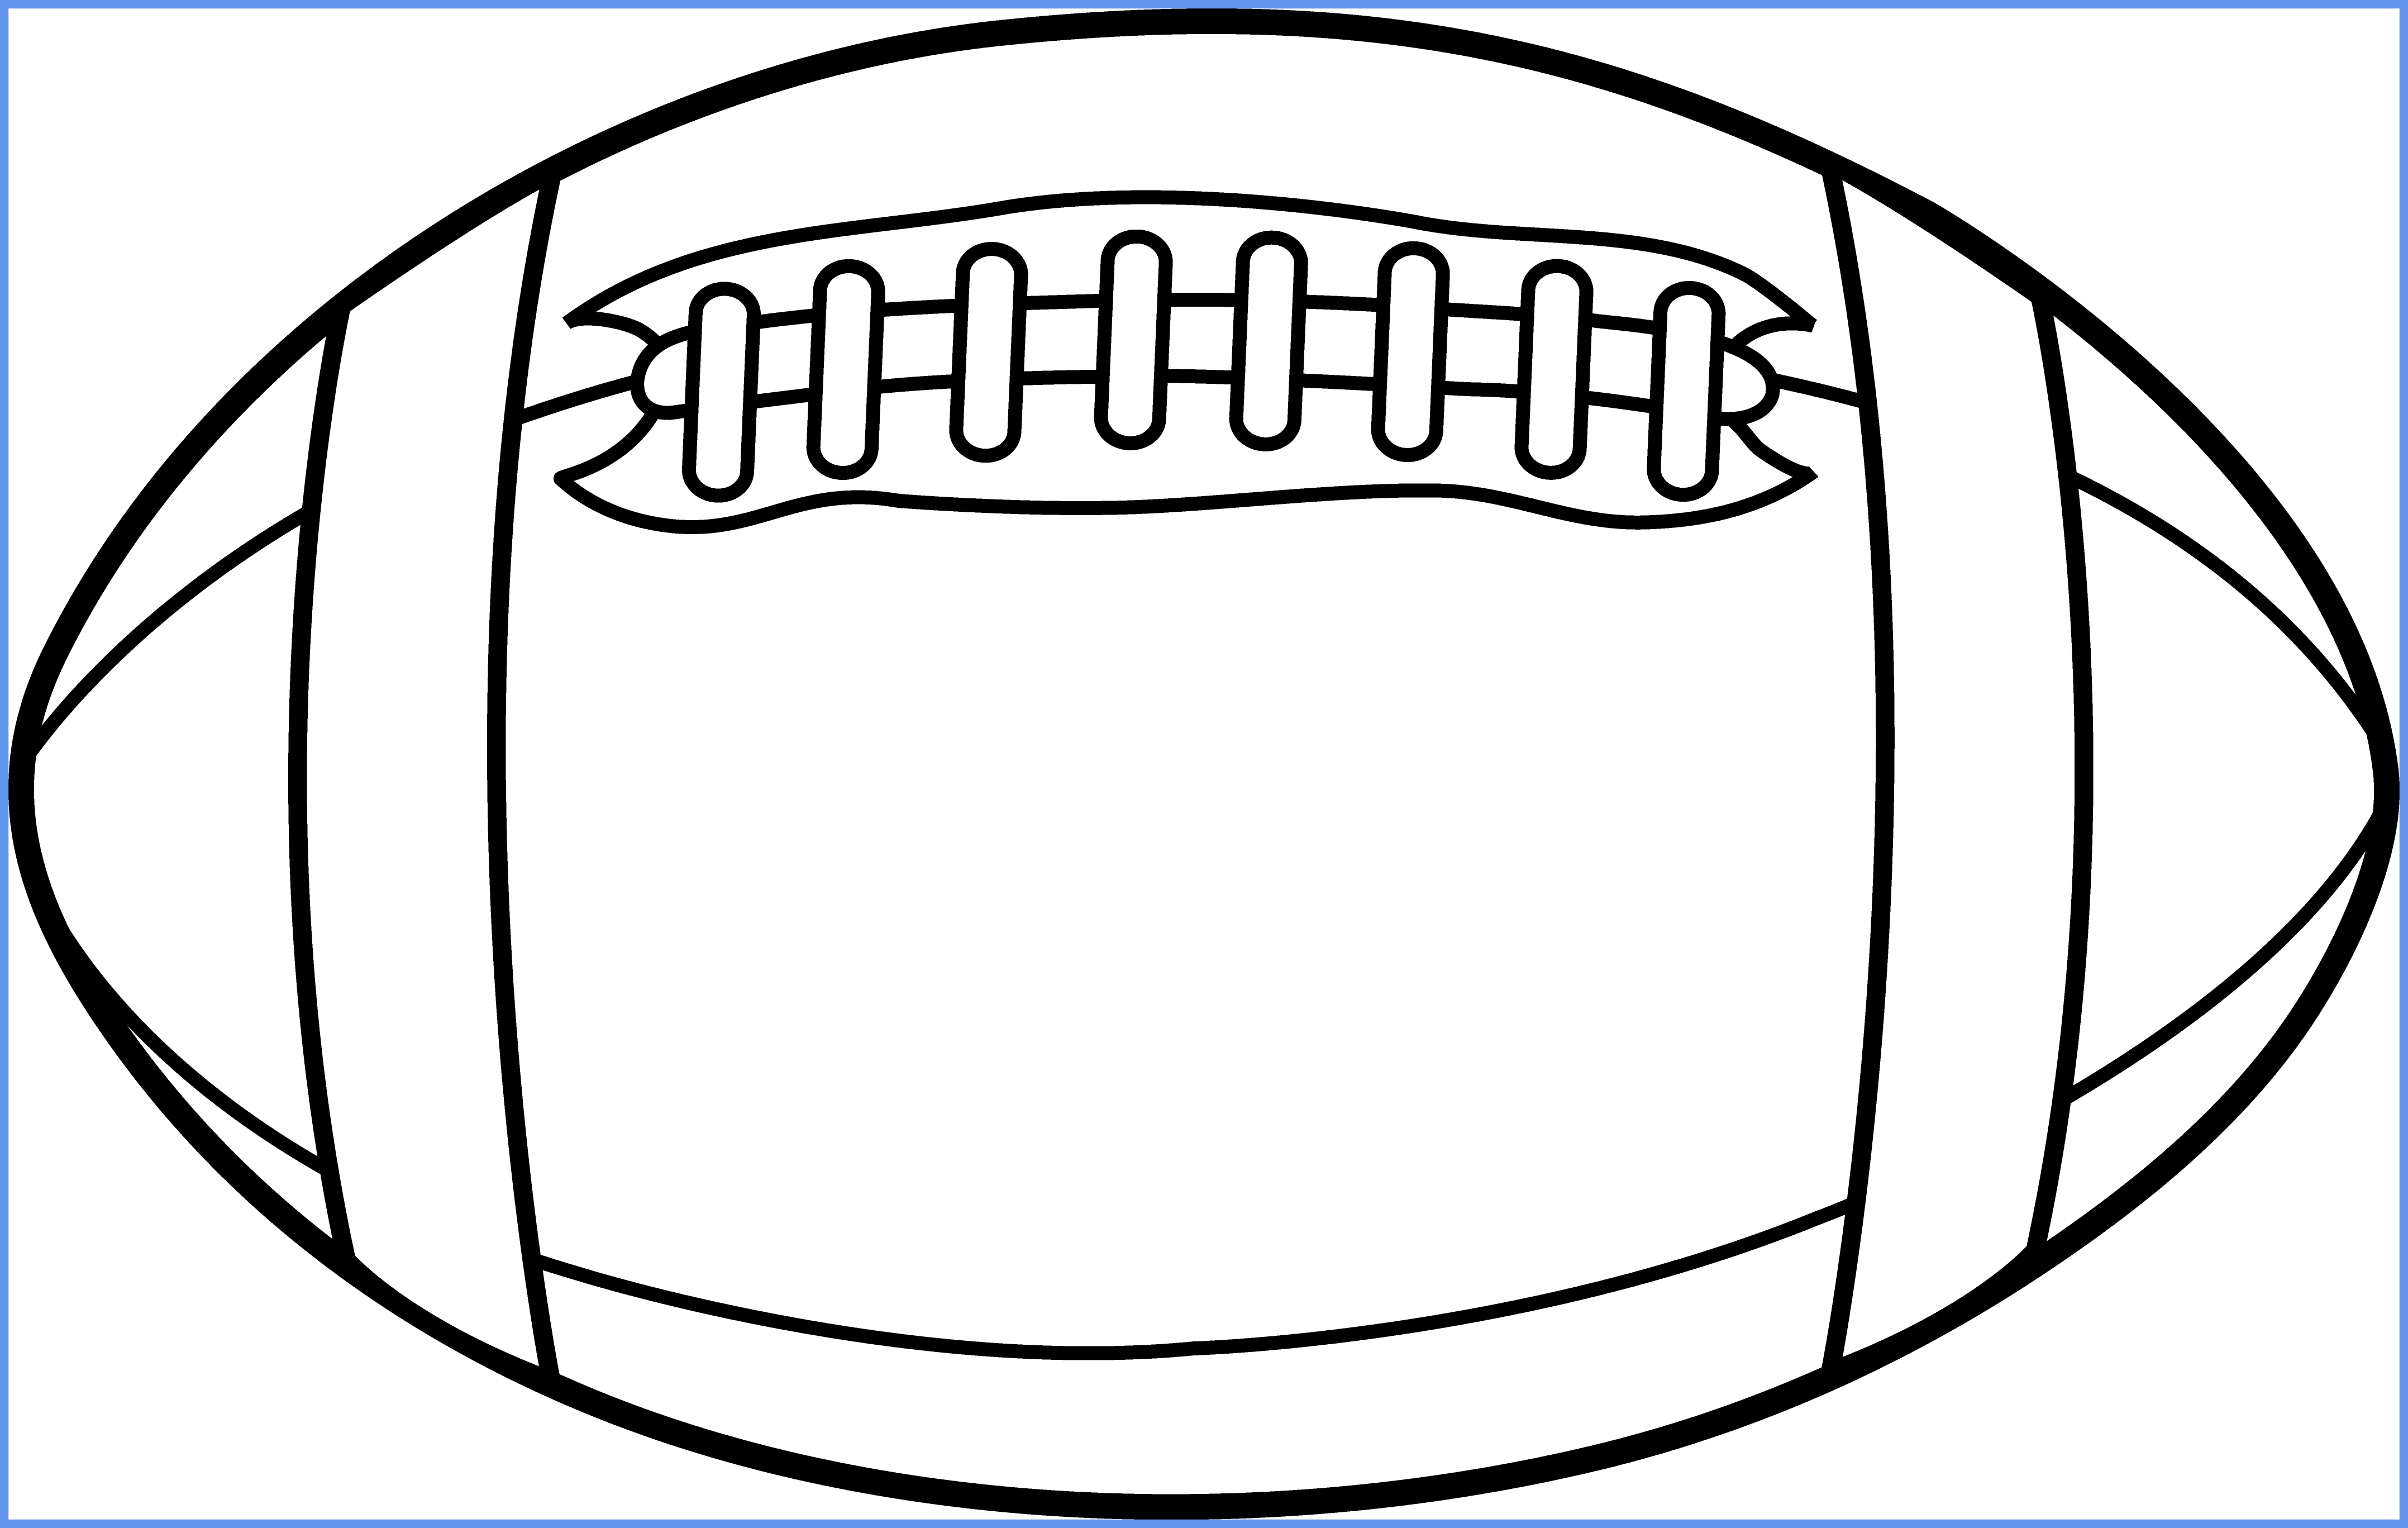 Marvelous field black and. Mom clipart football